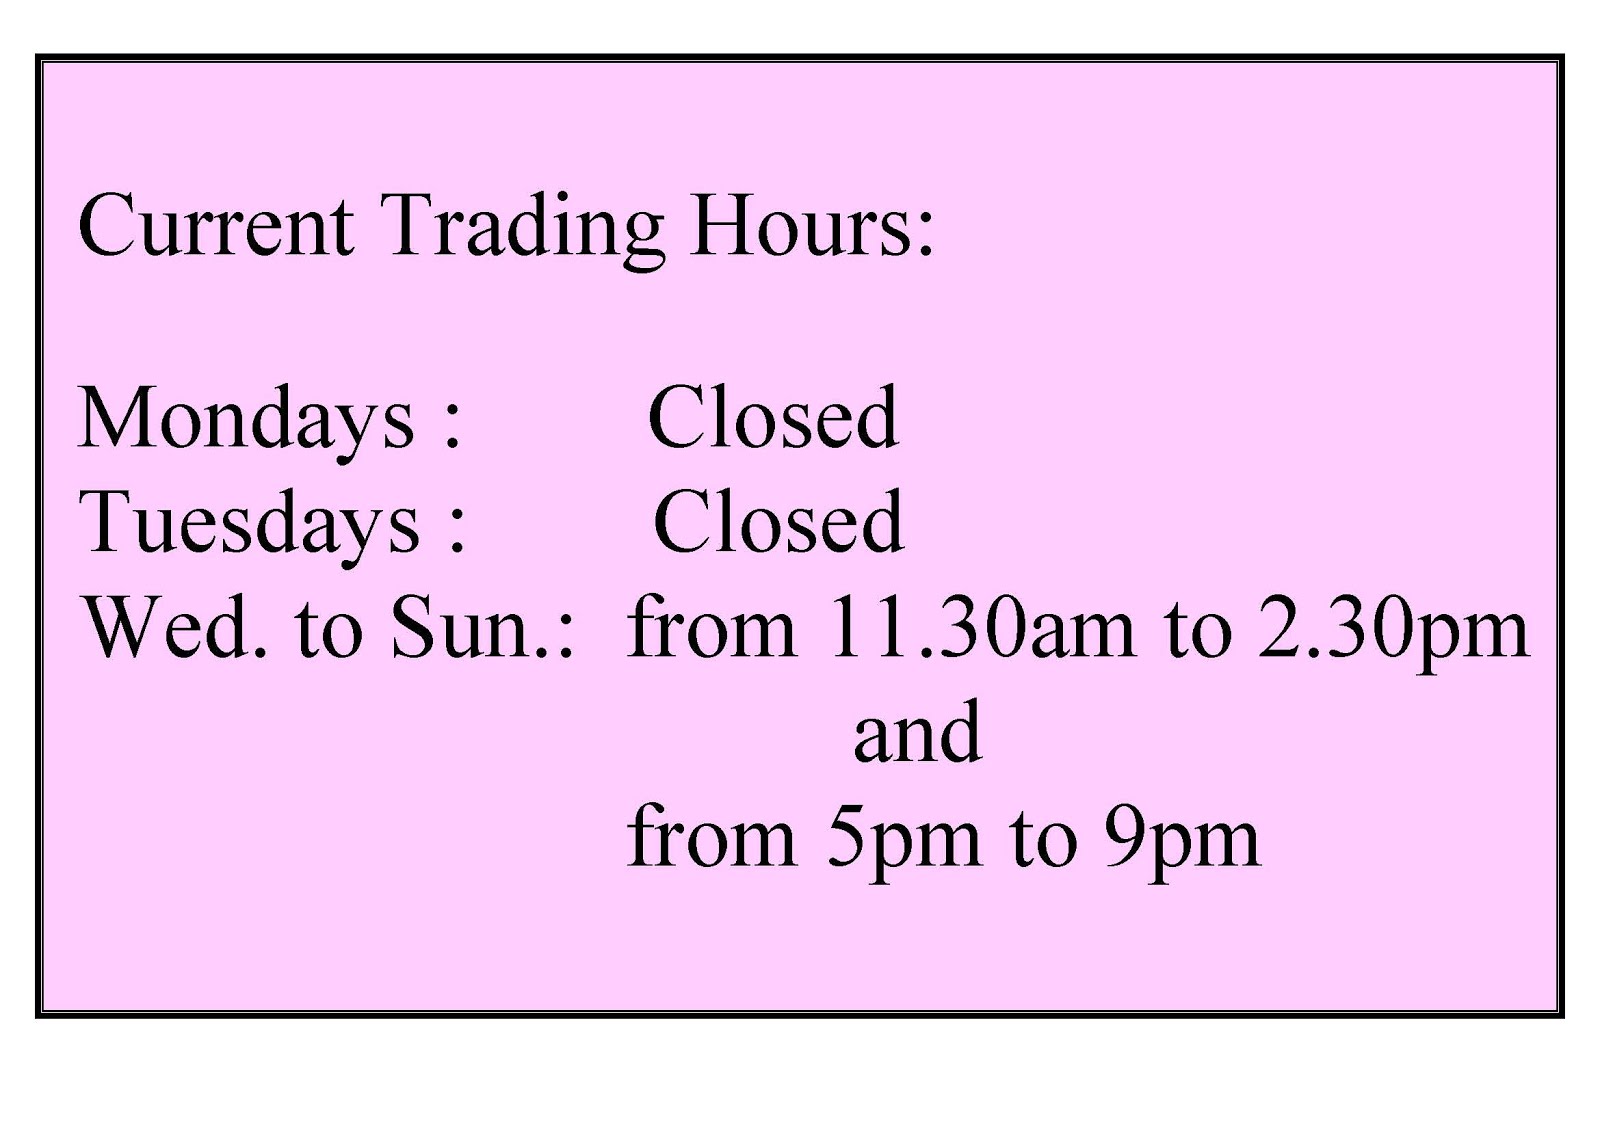 Current Trading Hours: